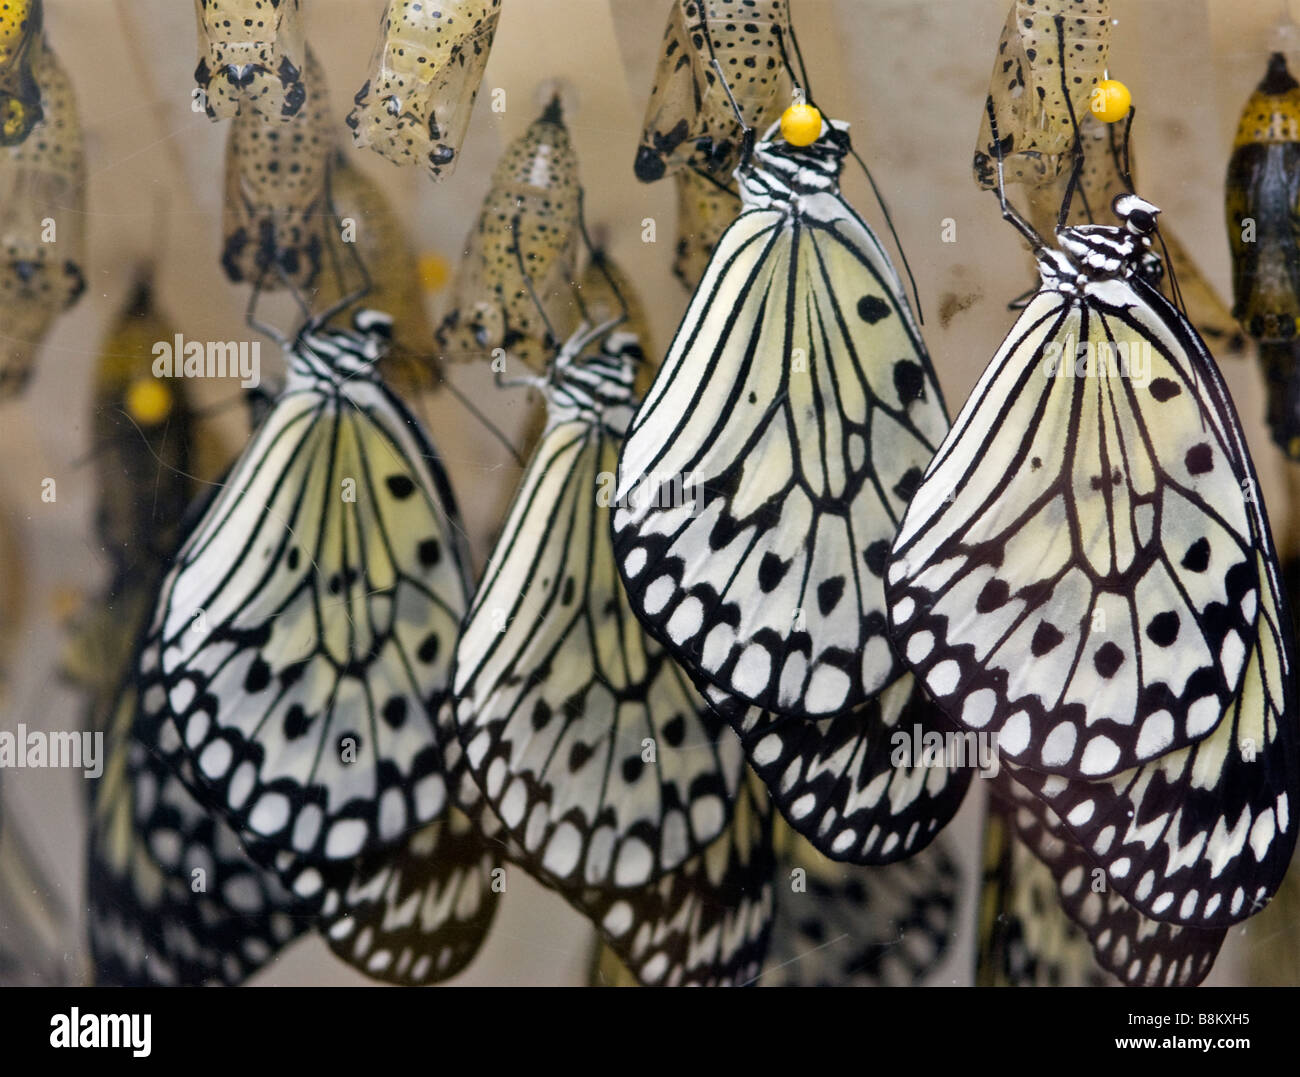 Tree nymph butterflies emerging from chrysalis Stock Photo